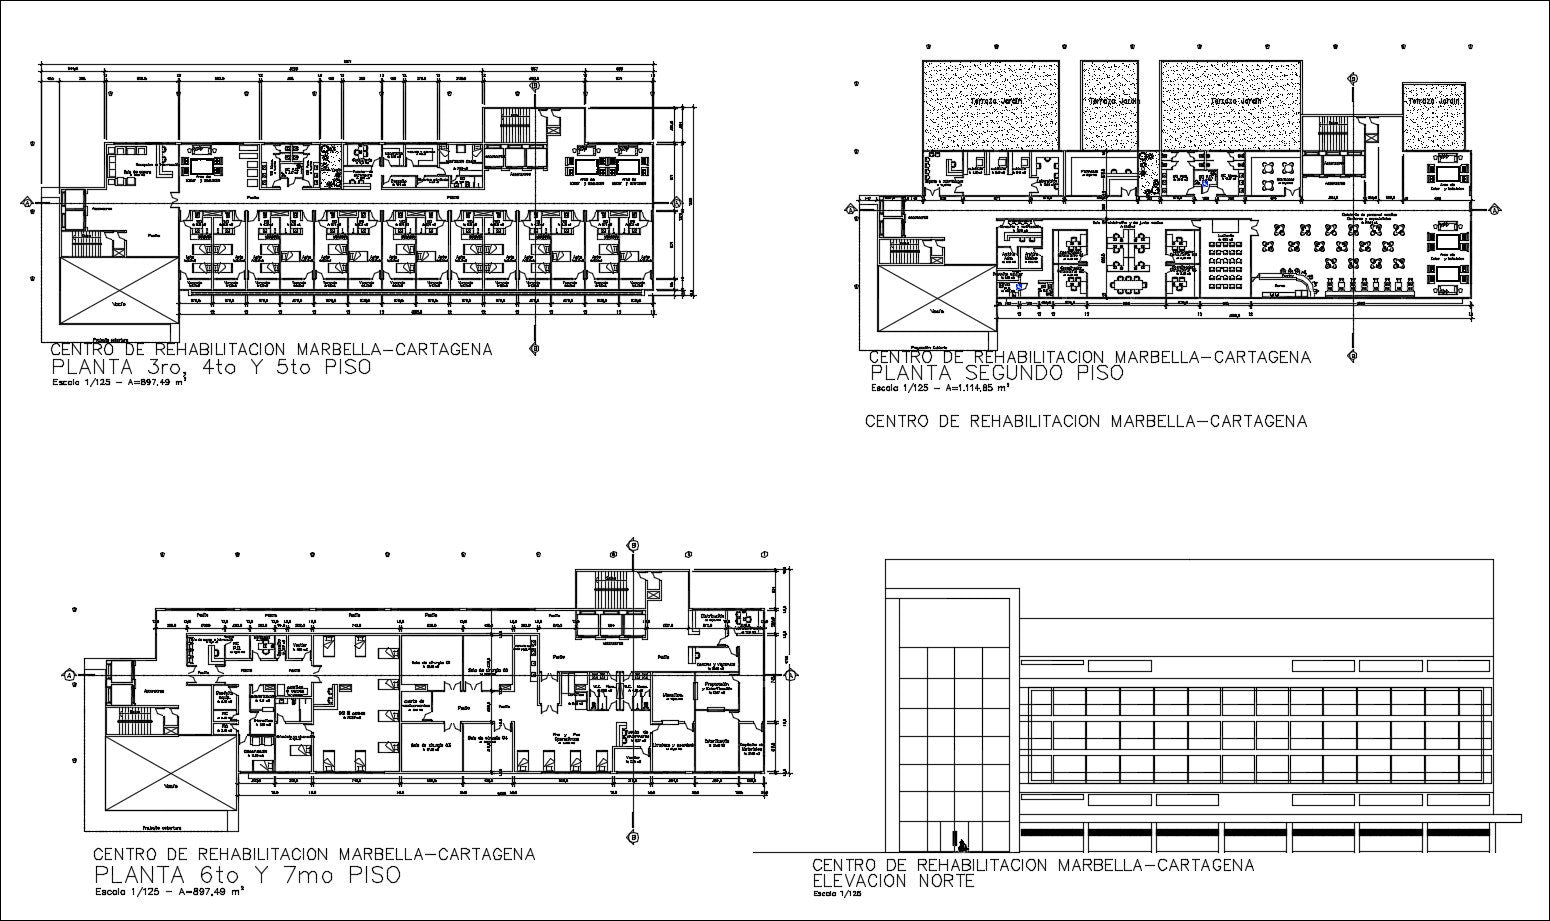 Recovery and rehabilitation center design drawing